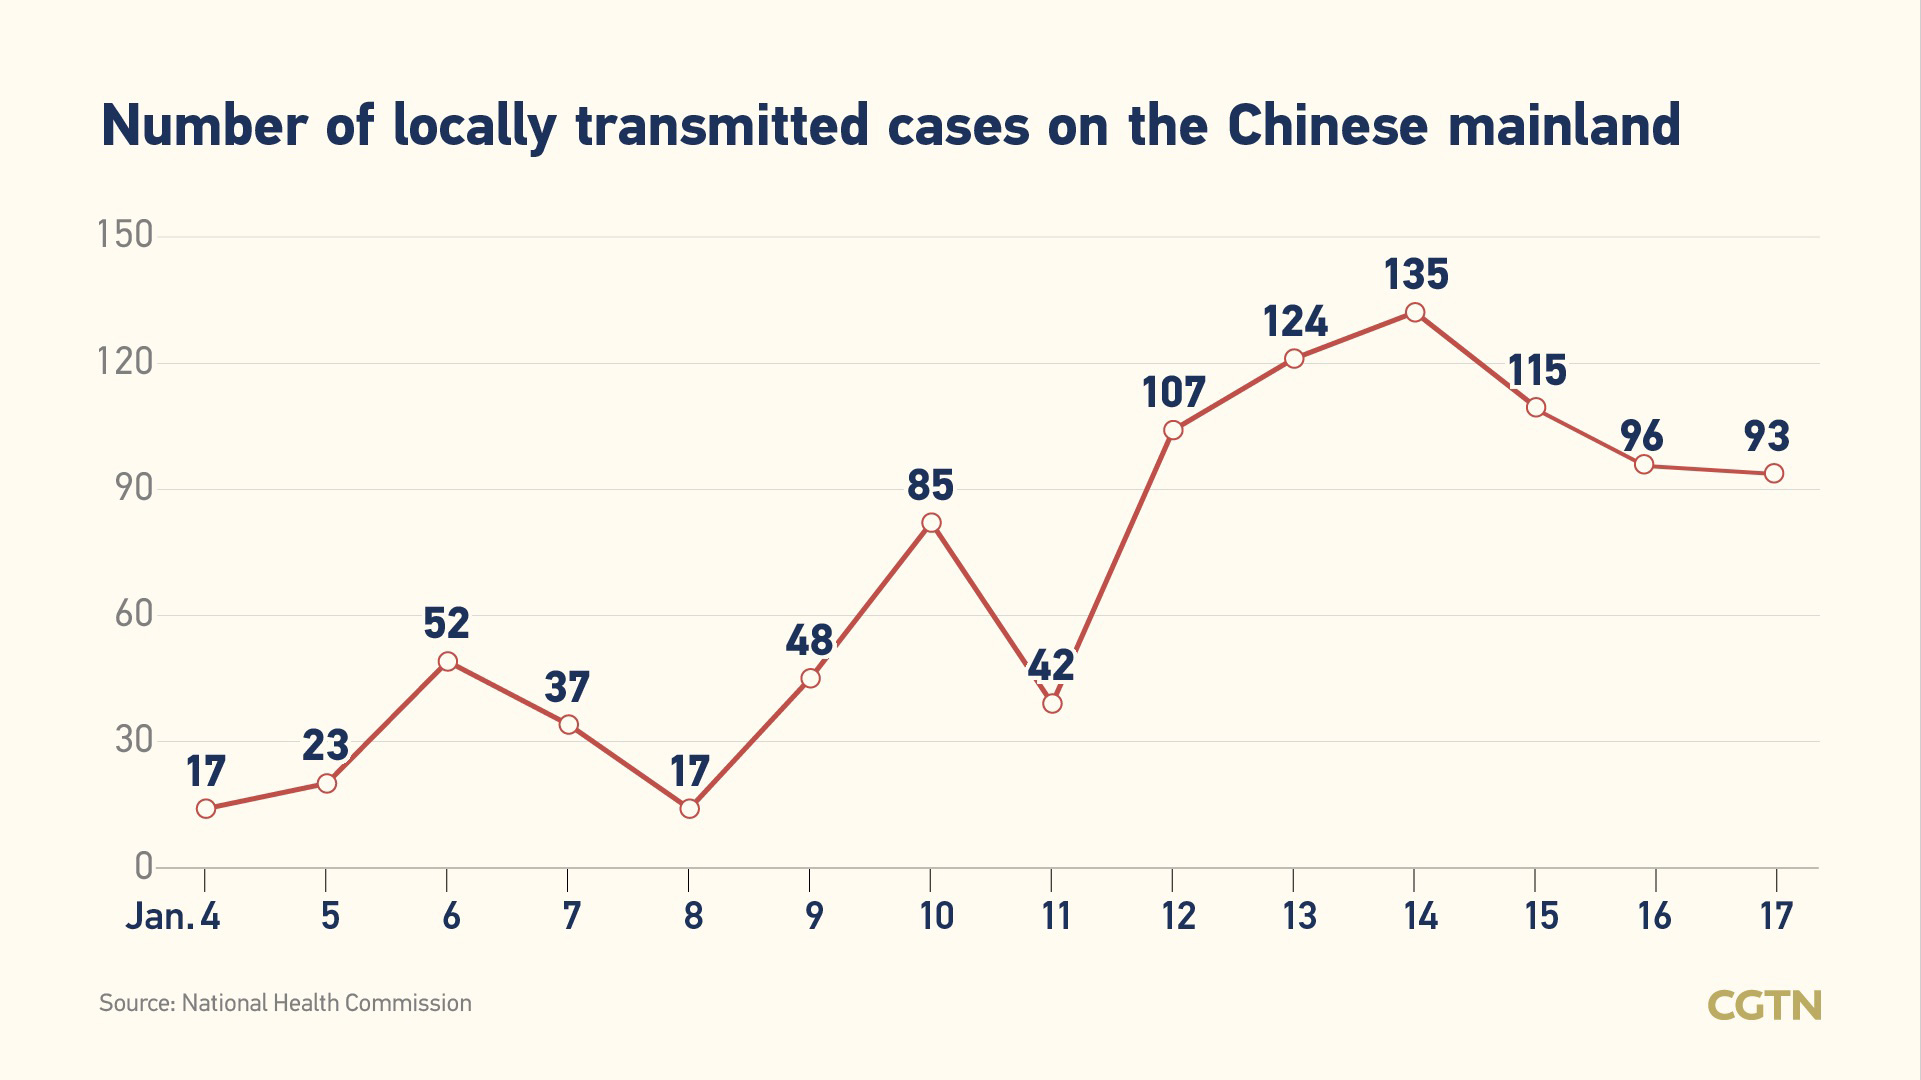 Chinese mainland reports 109 new COVID-19 cases